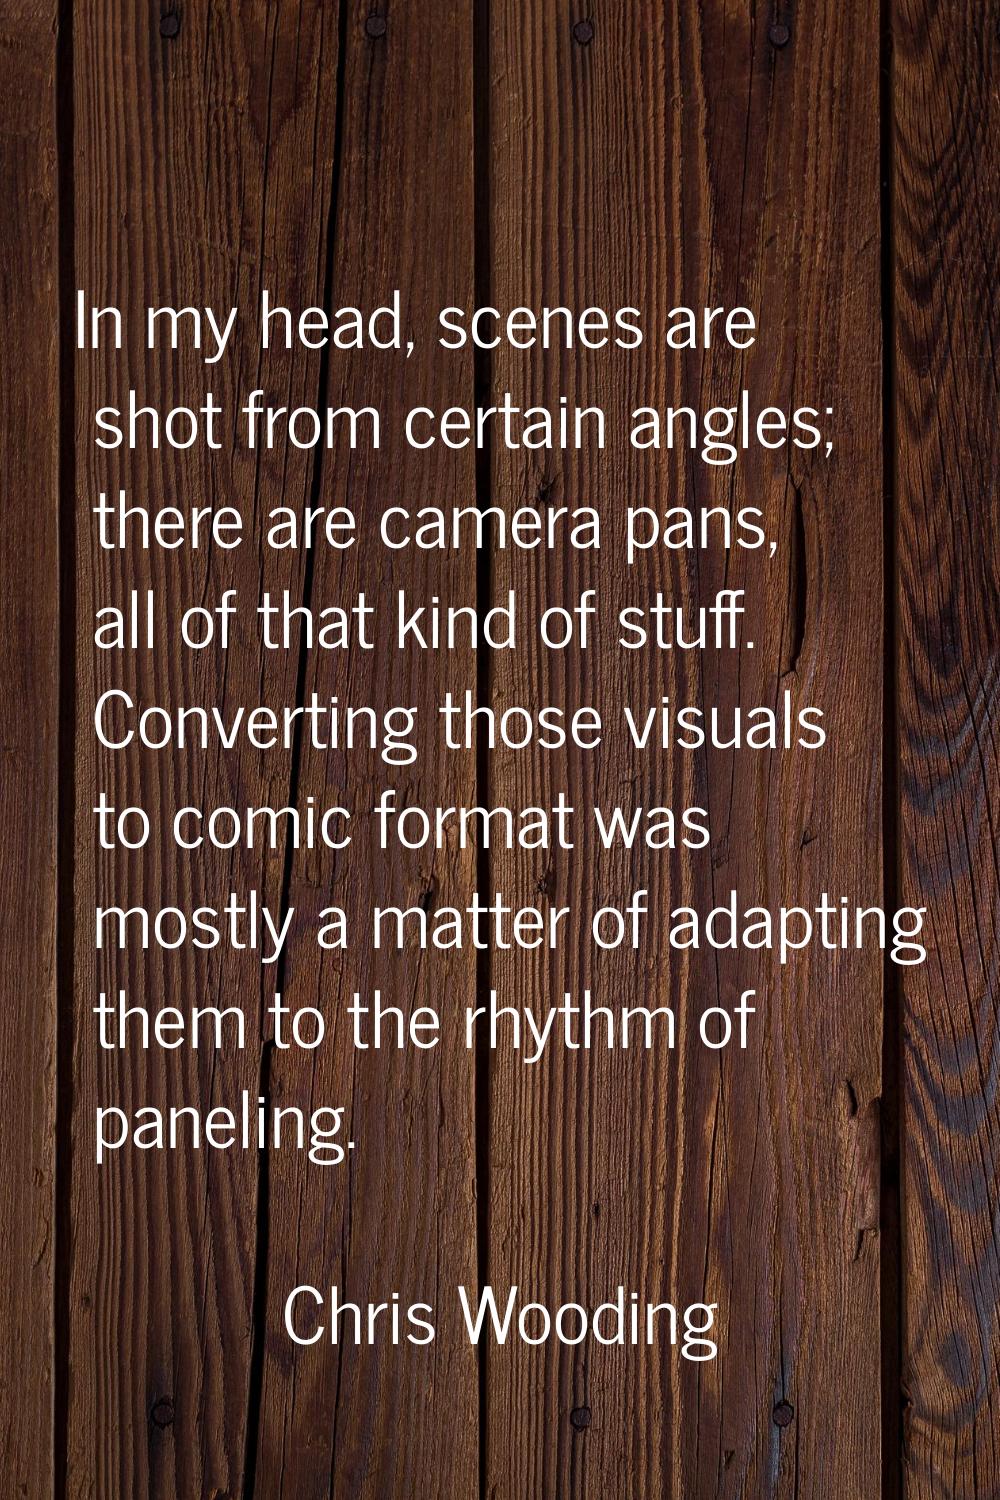 In my head, scenes are shot from certain angles; there are camera pans, all of that kind of stuff. 